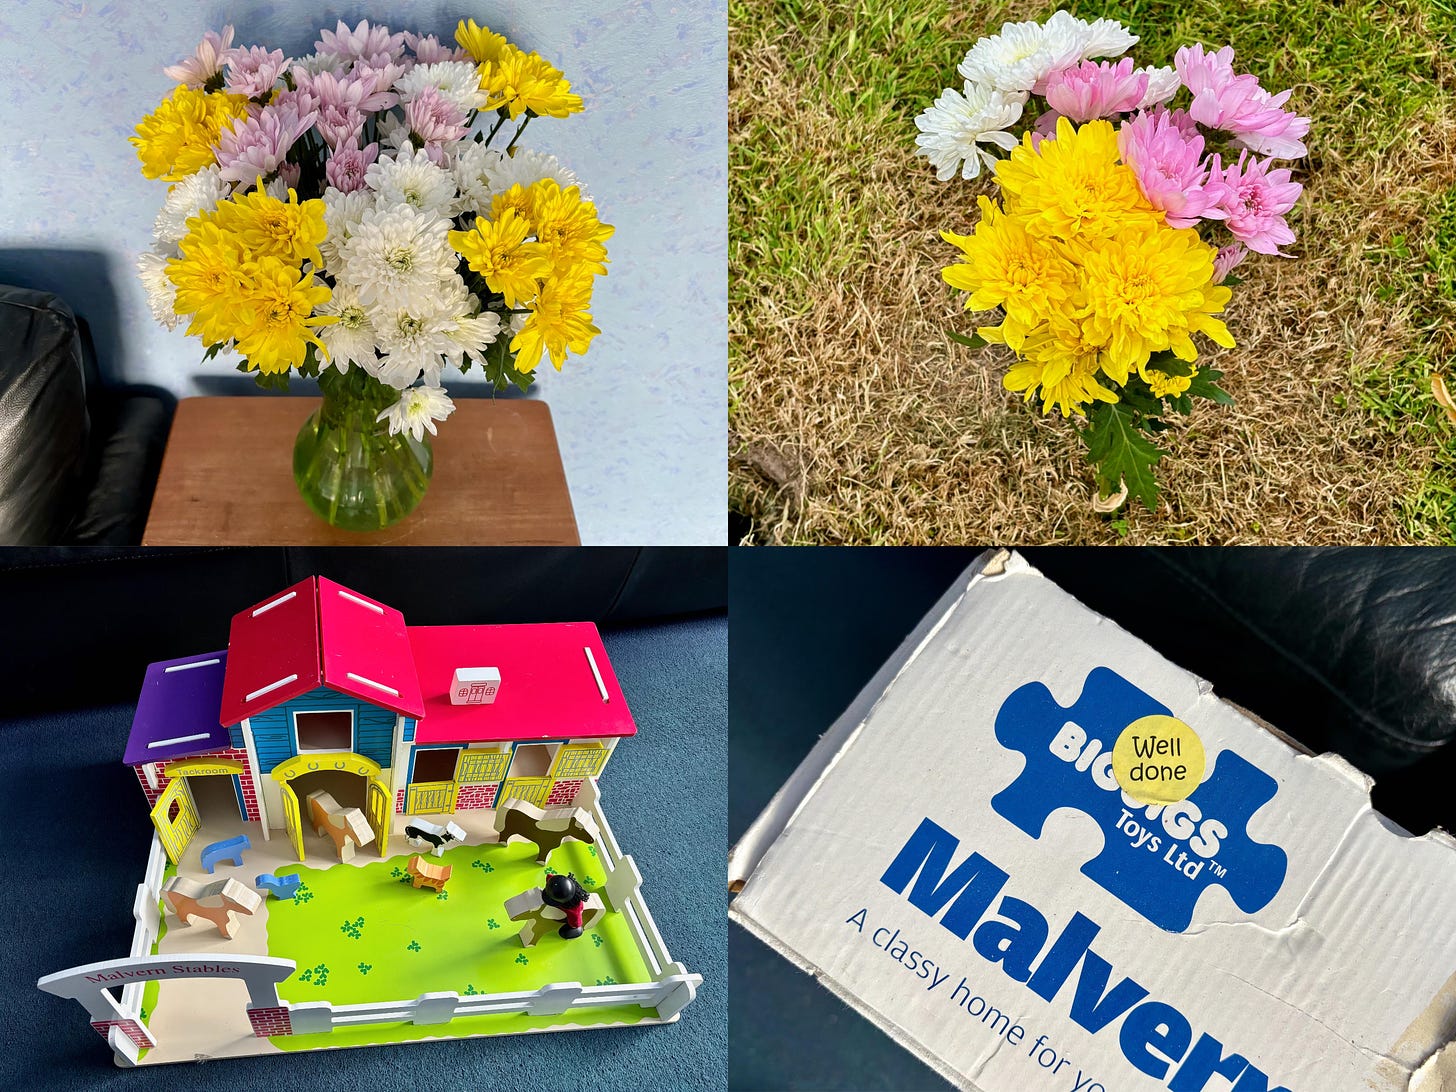 Collage of four images. Yellow, pink, and white carnations in a vase. A small set of the same flowers in a field. A children's wooden stable set. A 'well done' sticker on the stable set's box lid.